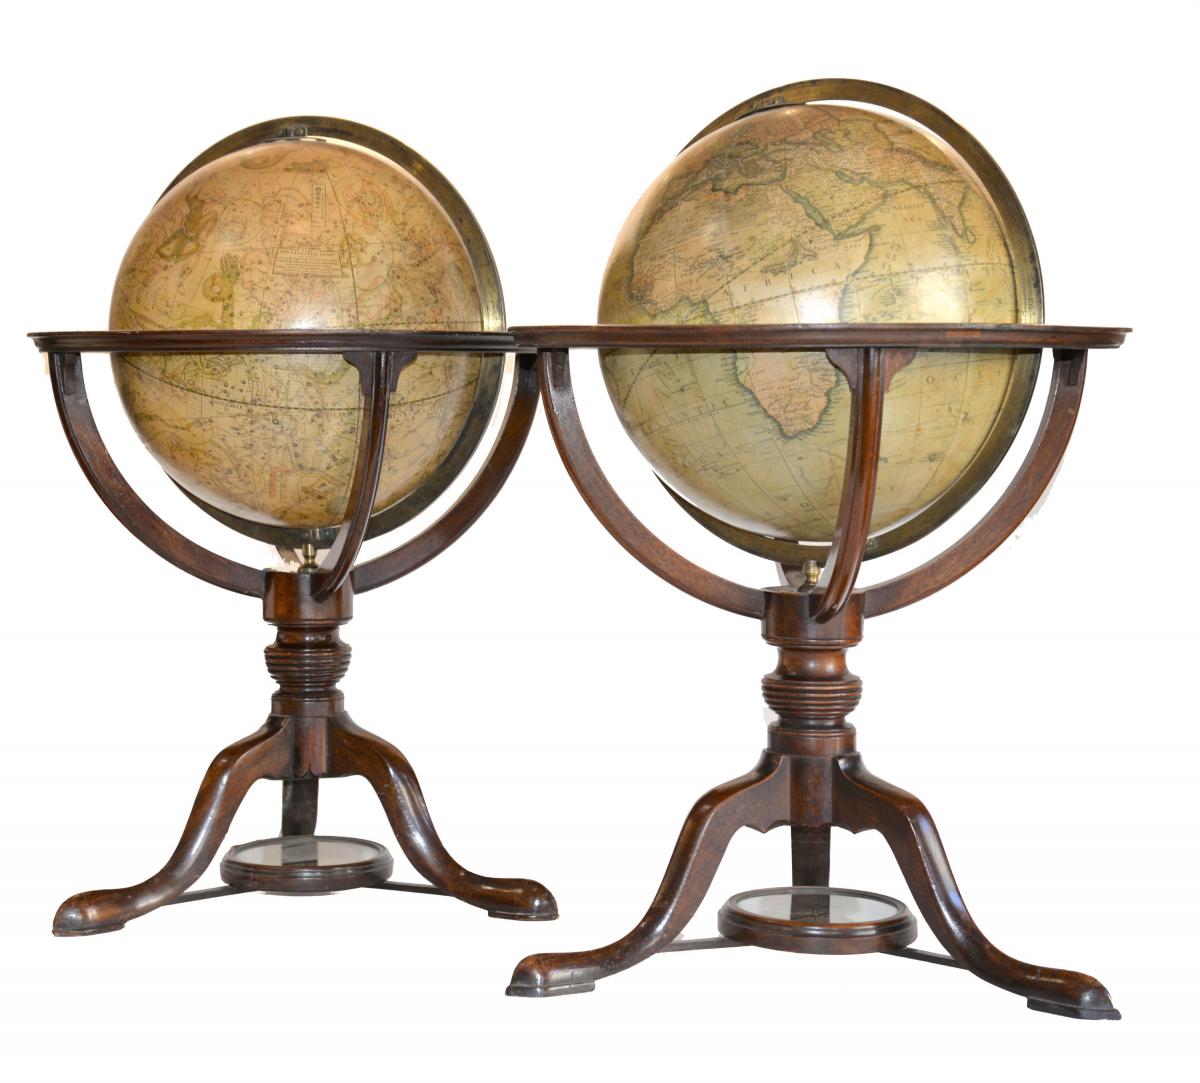 Cary's New Terrestrial and Celestial Globes